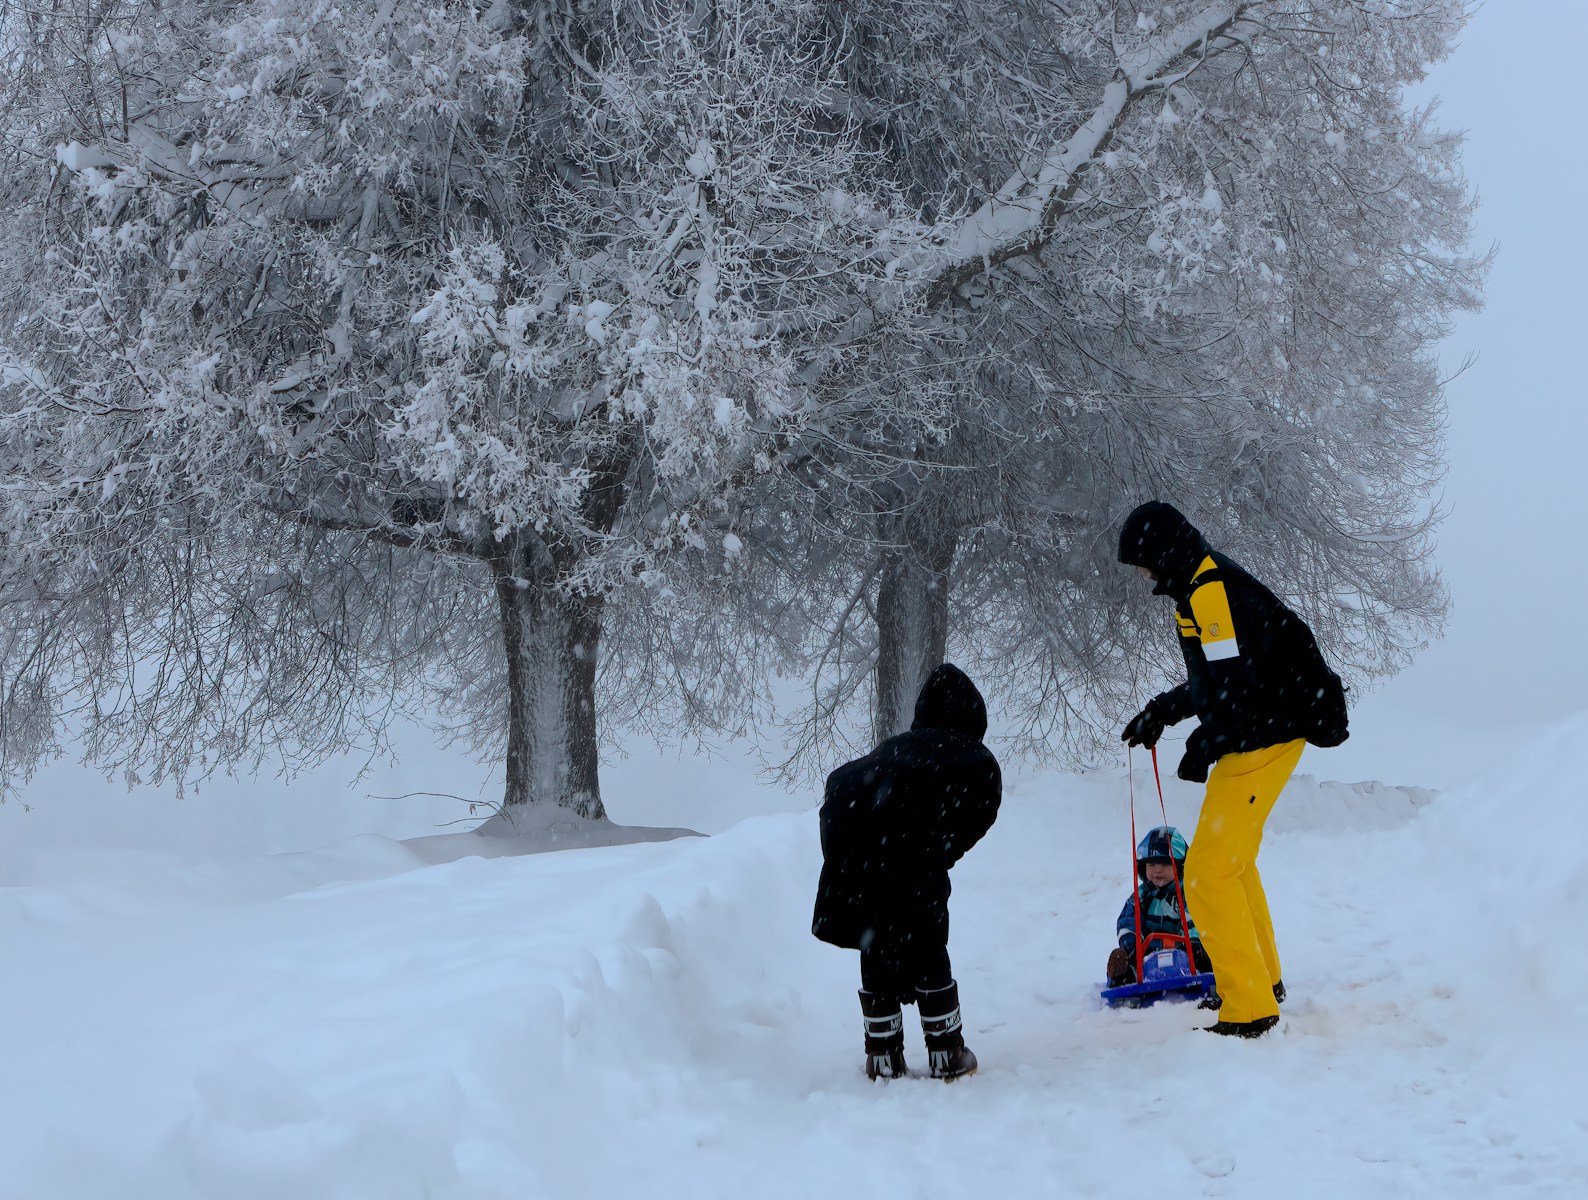 5 winter ideas to enjoy outdoors with the family